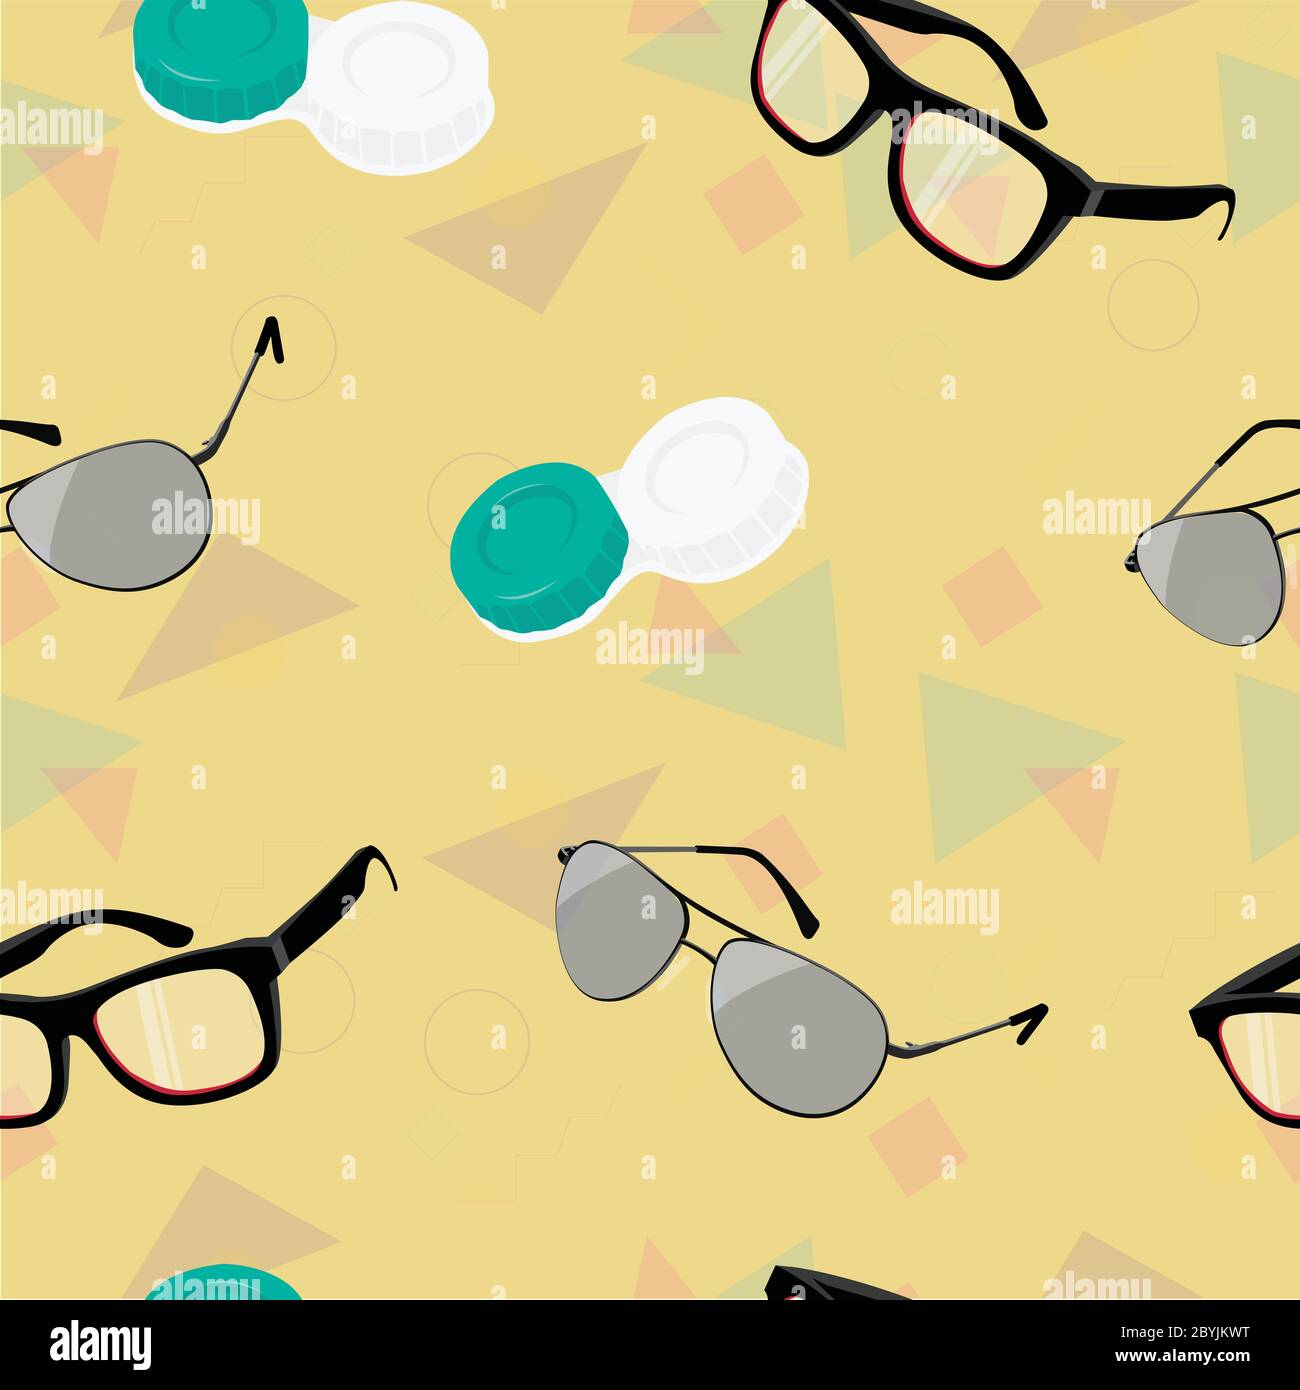 Sunglasses lenses Stock Vector Images - Alamy